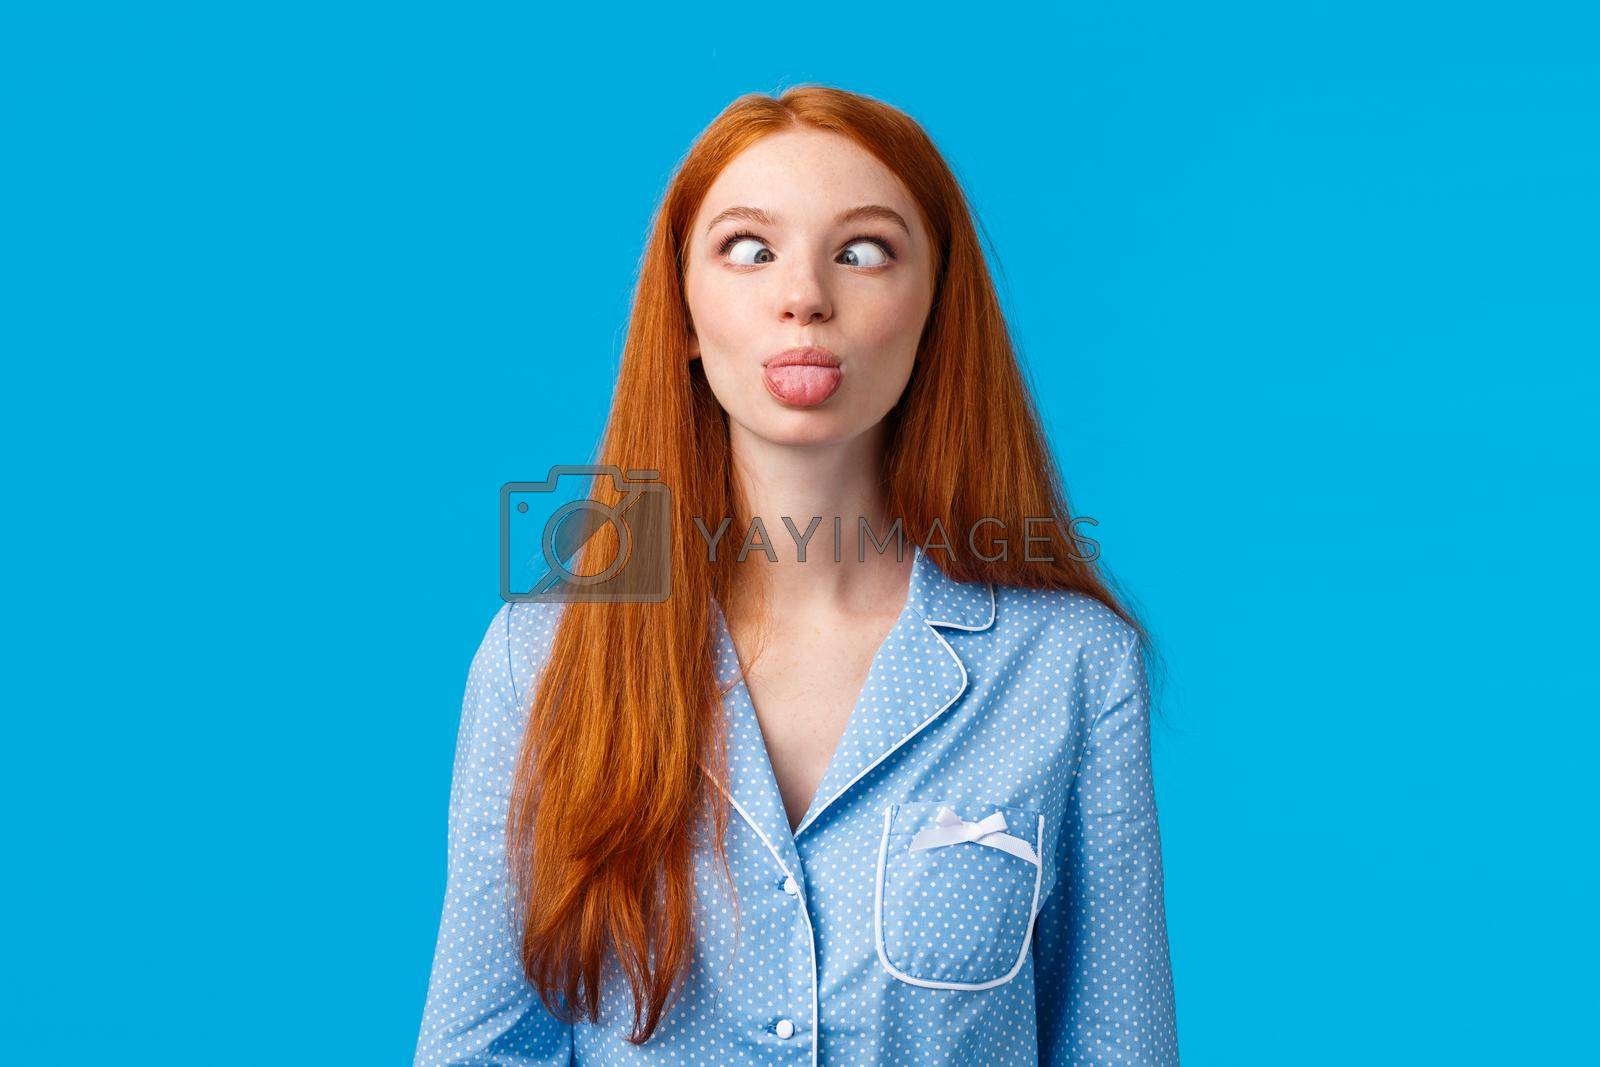 Royalty free image of Be funny and silly. Redhead carefree and enthusiastic caucasian girl squinting, making goofy expression, showing tongue, standing blue background in nightwear, fool around by Benzoix